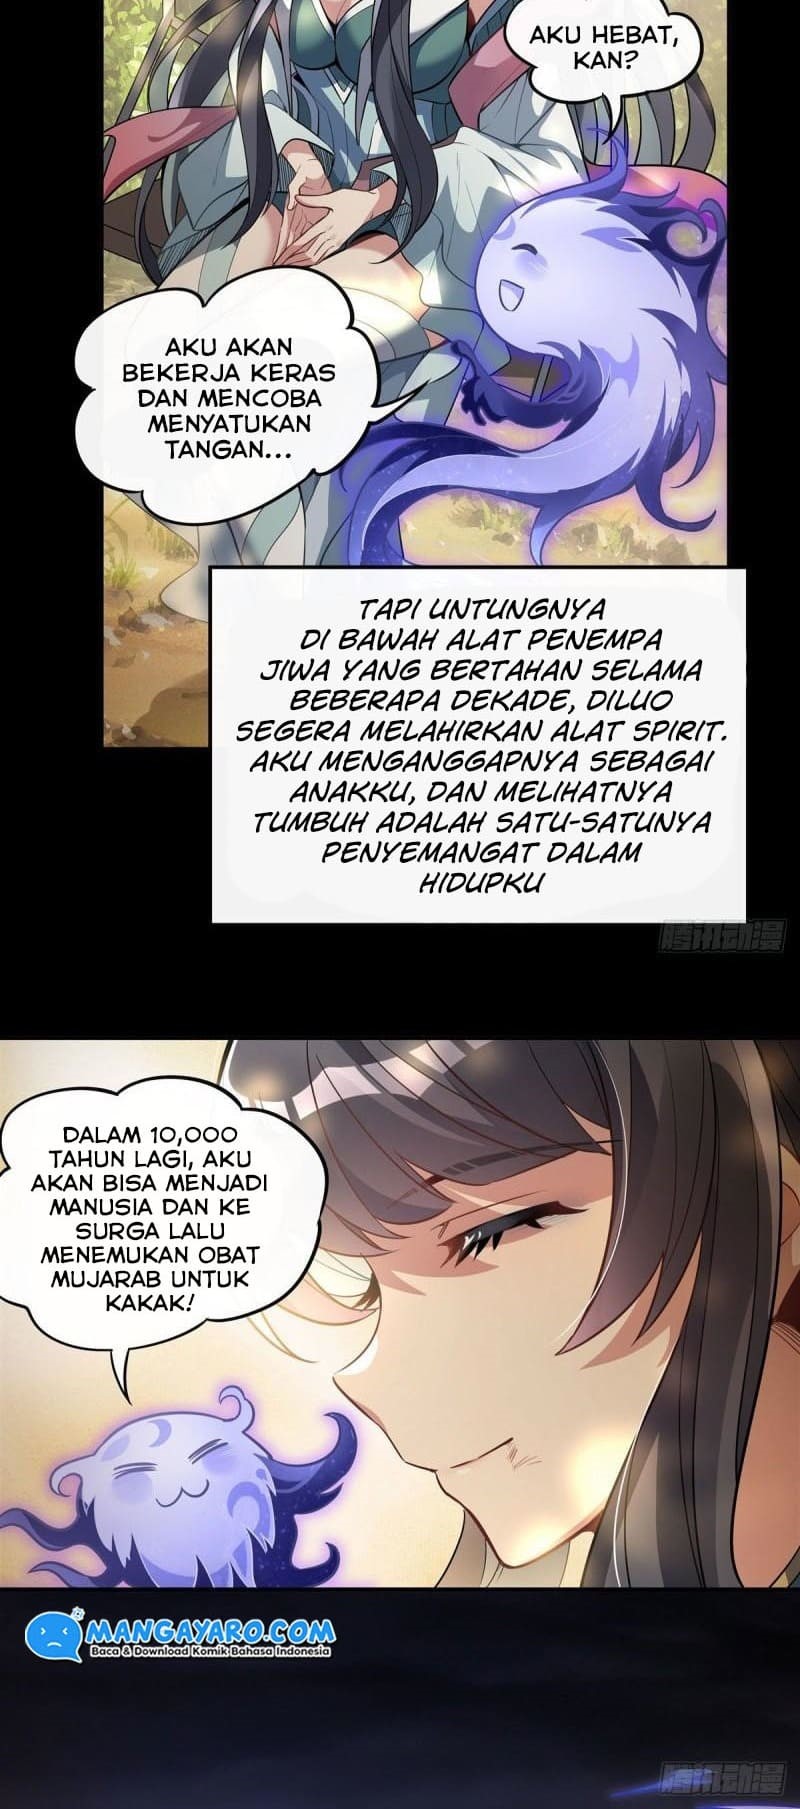 Dilarang COPAS - situs resmi www.mangacanblog.com - Komik my female apprentices are all big shots from the future 059 - chapter 59 60 Indonesia my female apprentices are all big shots from the future 059 - chapter 59 Terbaru 9|Baca Manga Komik Indonesia|Mangacan